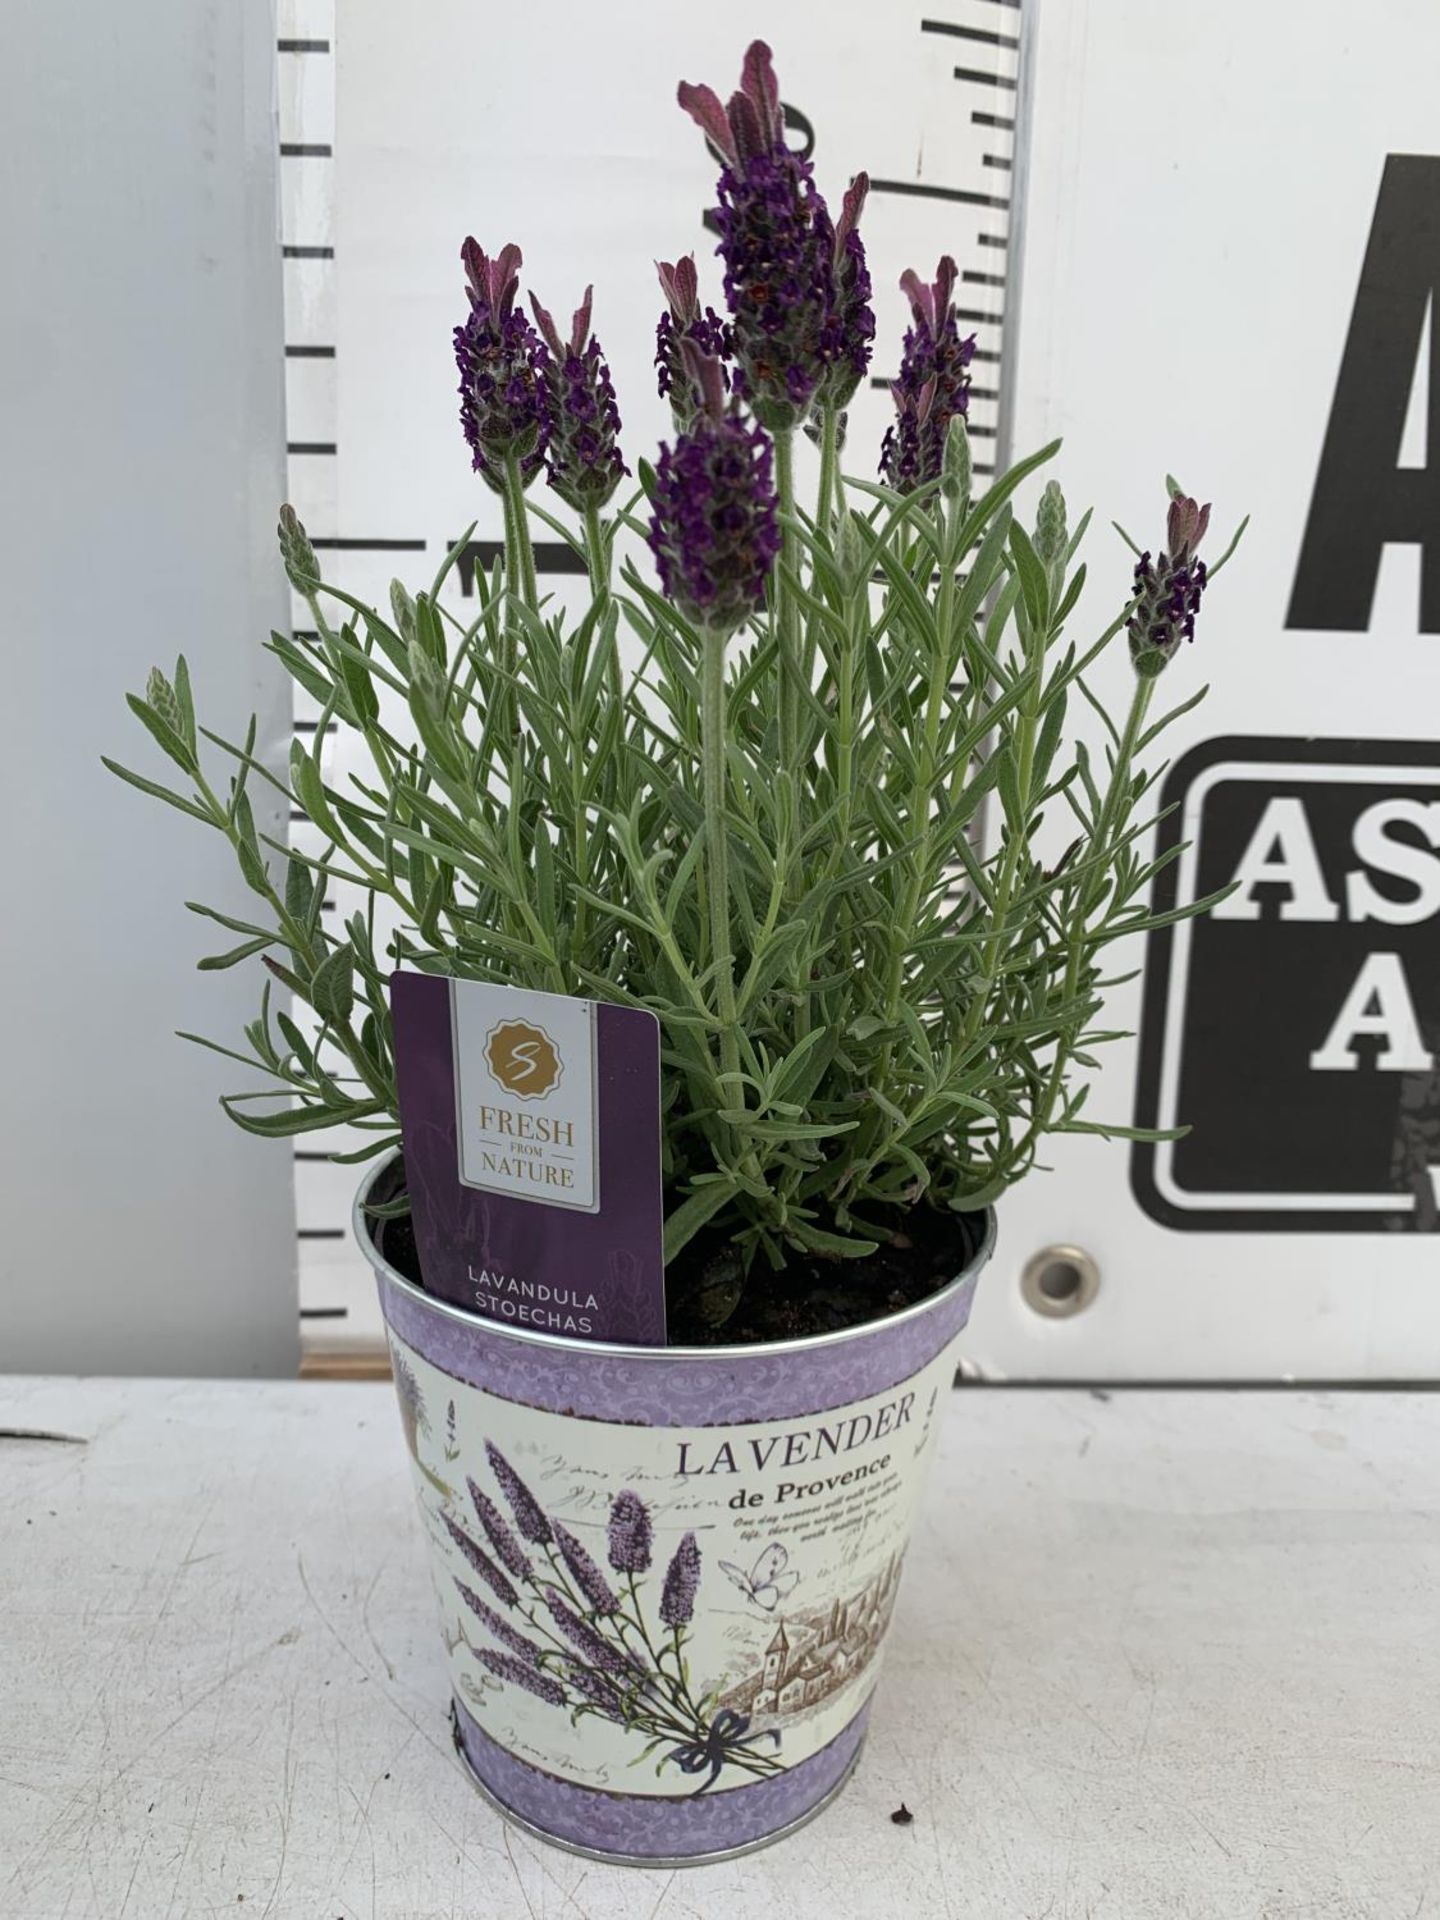 SIX LAVENDULA LAVENDER ST ANOUK COLLECTION IN DECORATIVE METAL POTS TO BE SOLD FOR THE SIX NO VAT - Image 5 of 8